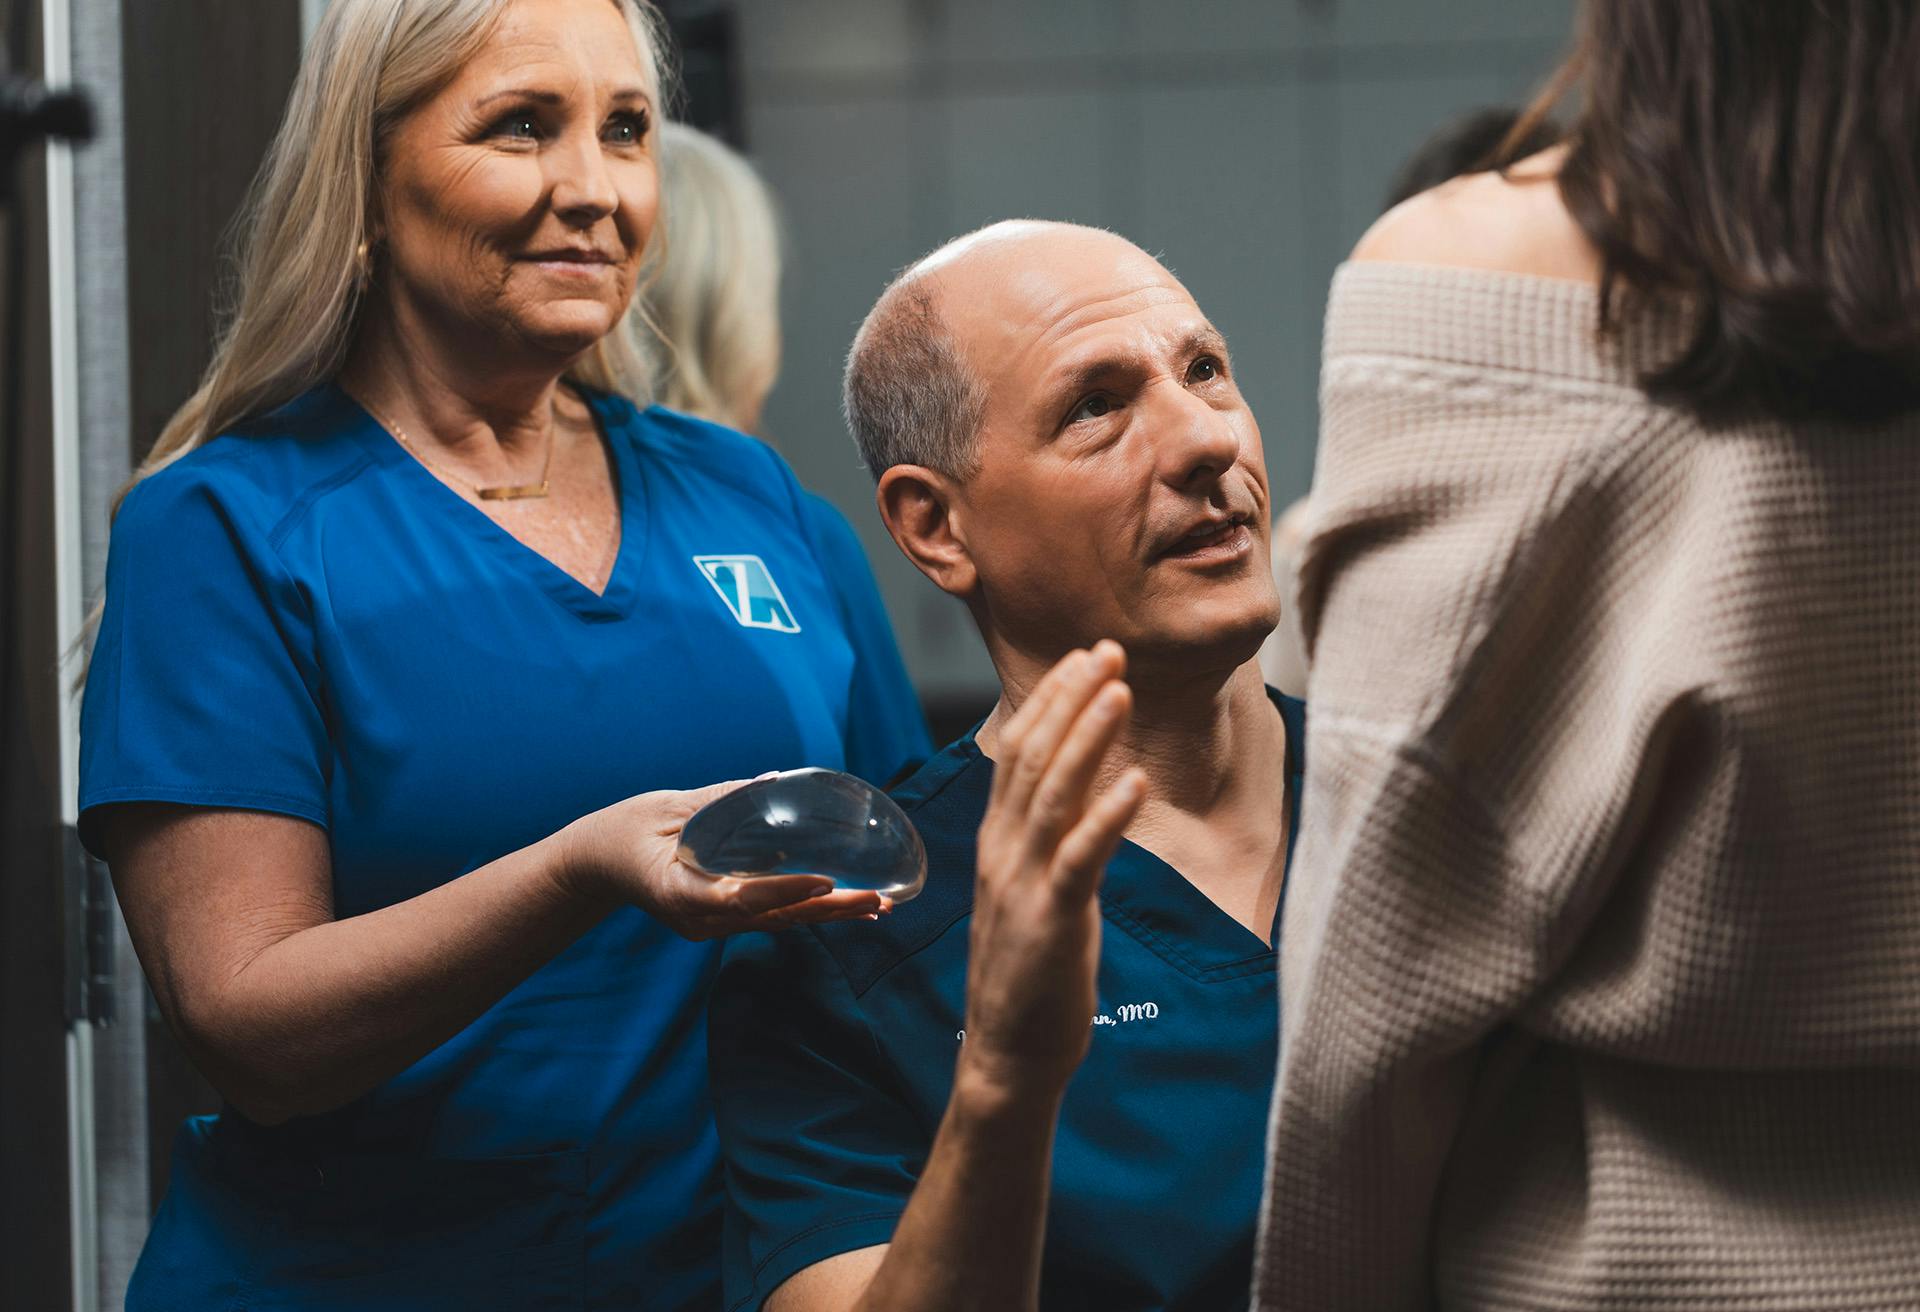 Dr. Zenn looking at a patient with a nurse behind him holding a breast implant